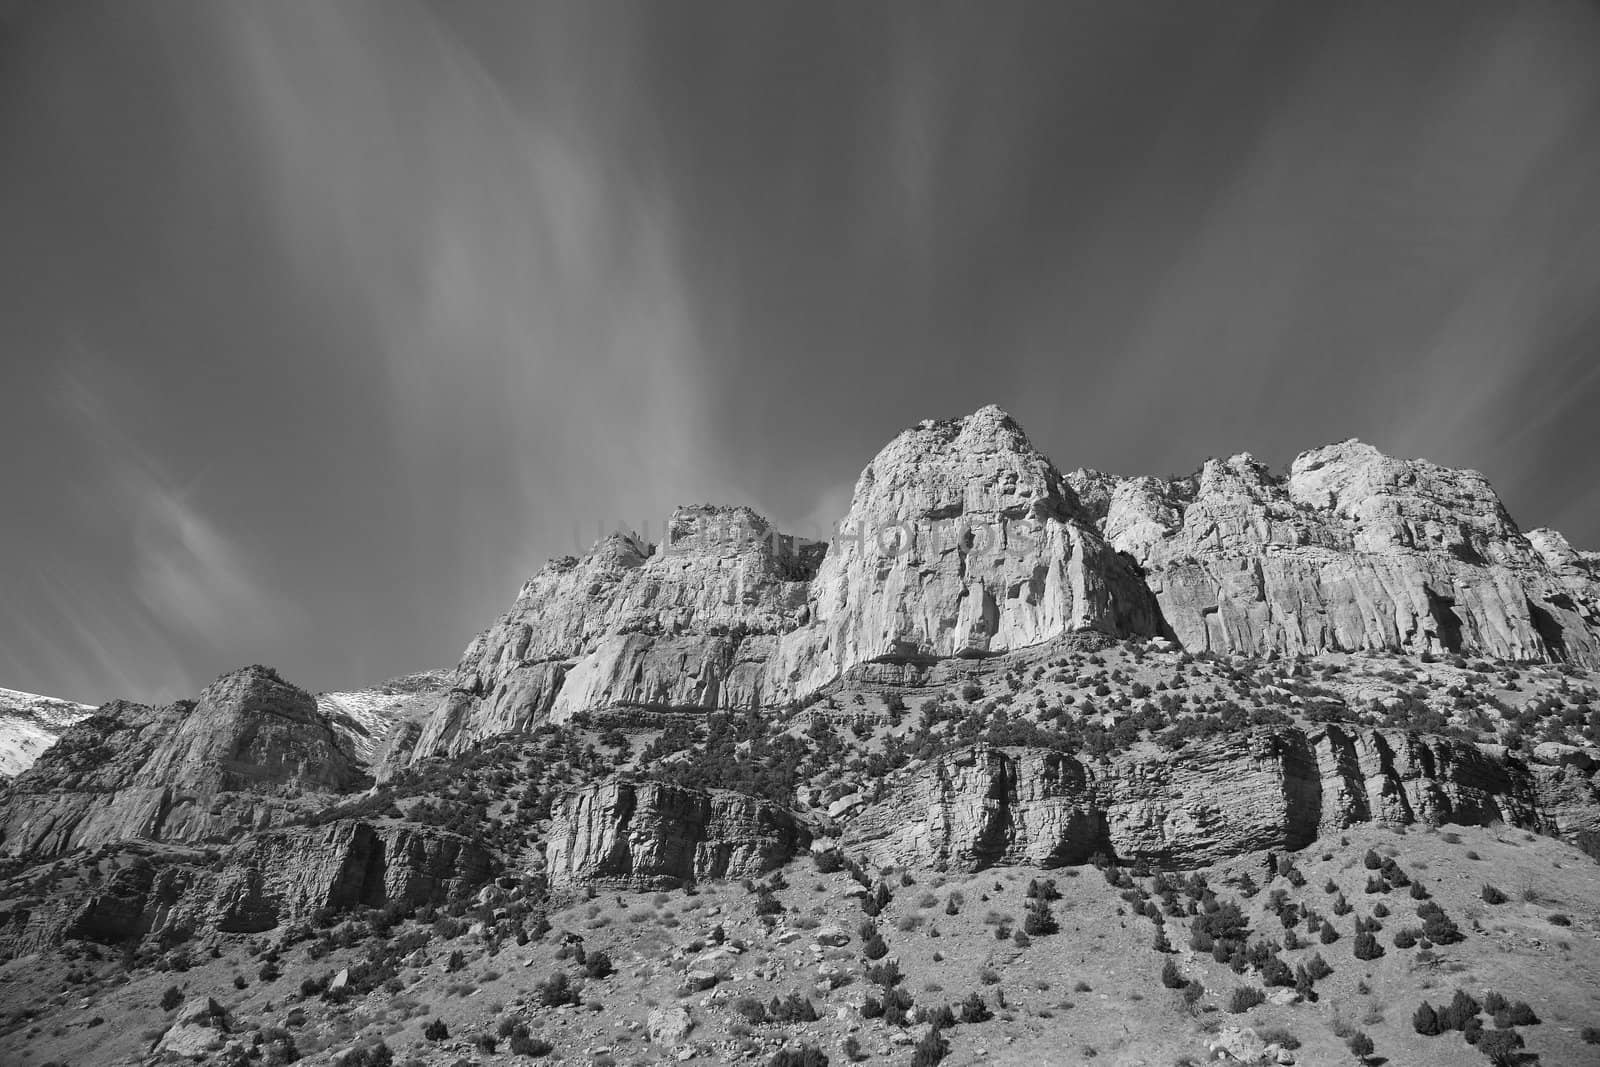 Mountain Range - Wyoming in Black and White by Ffooter